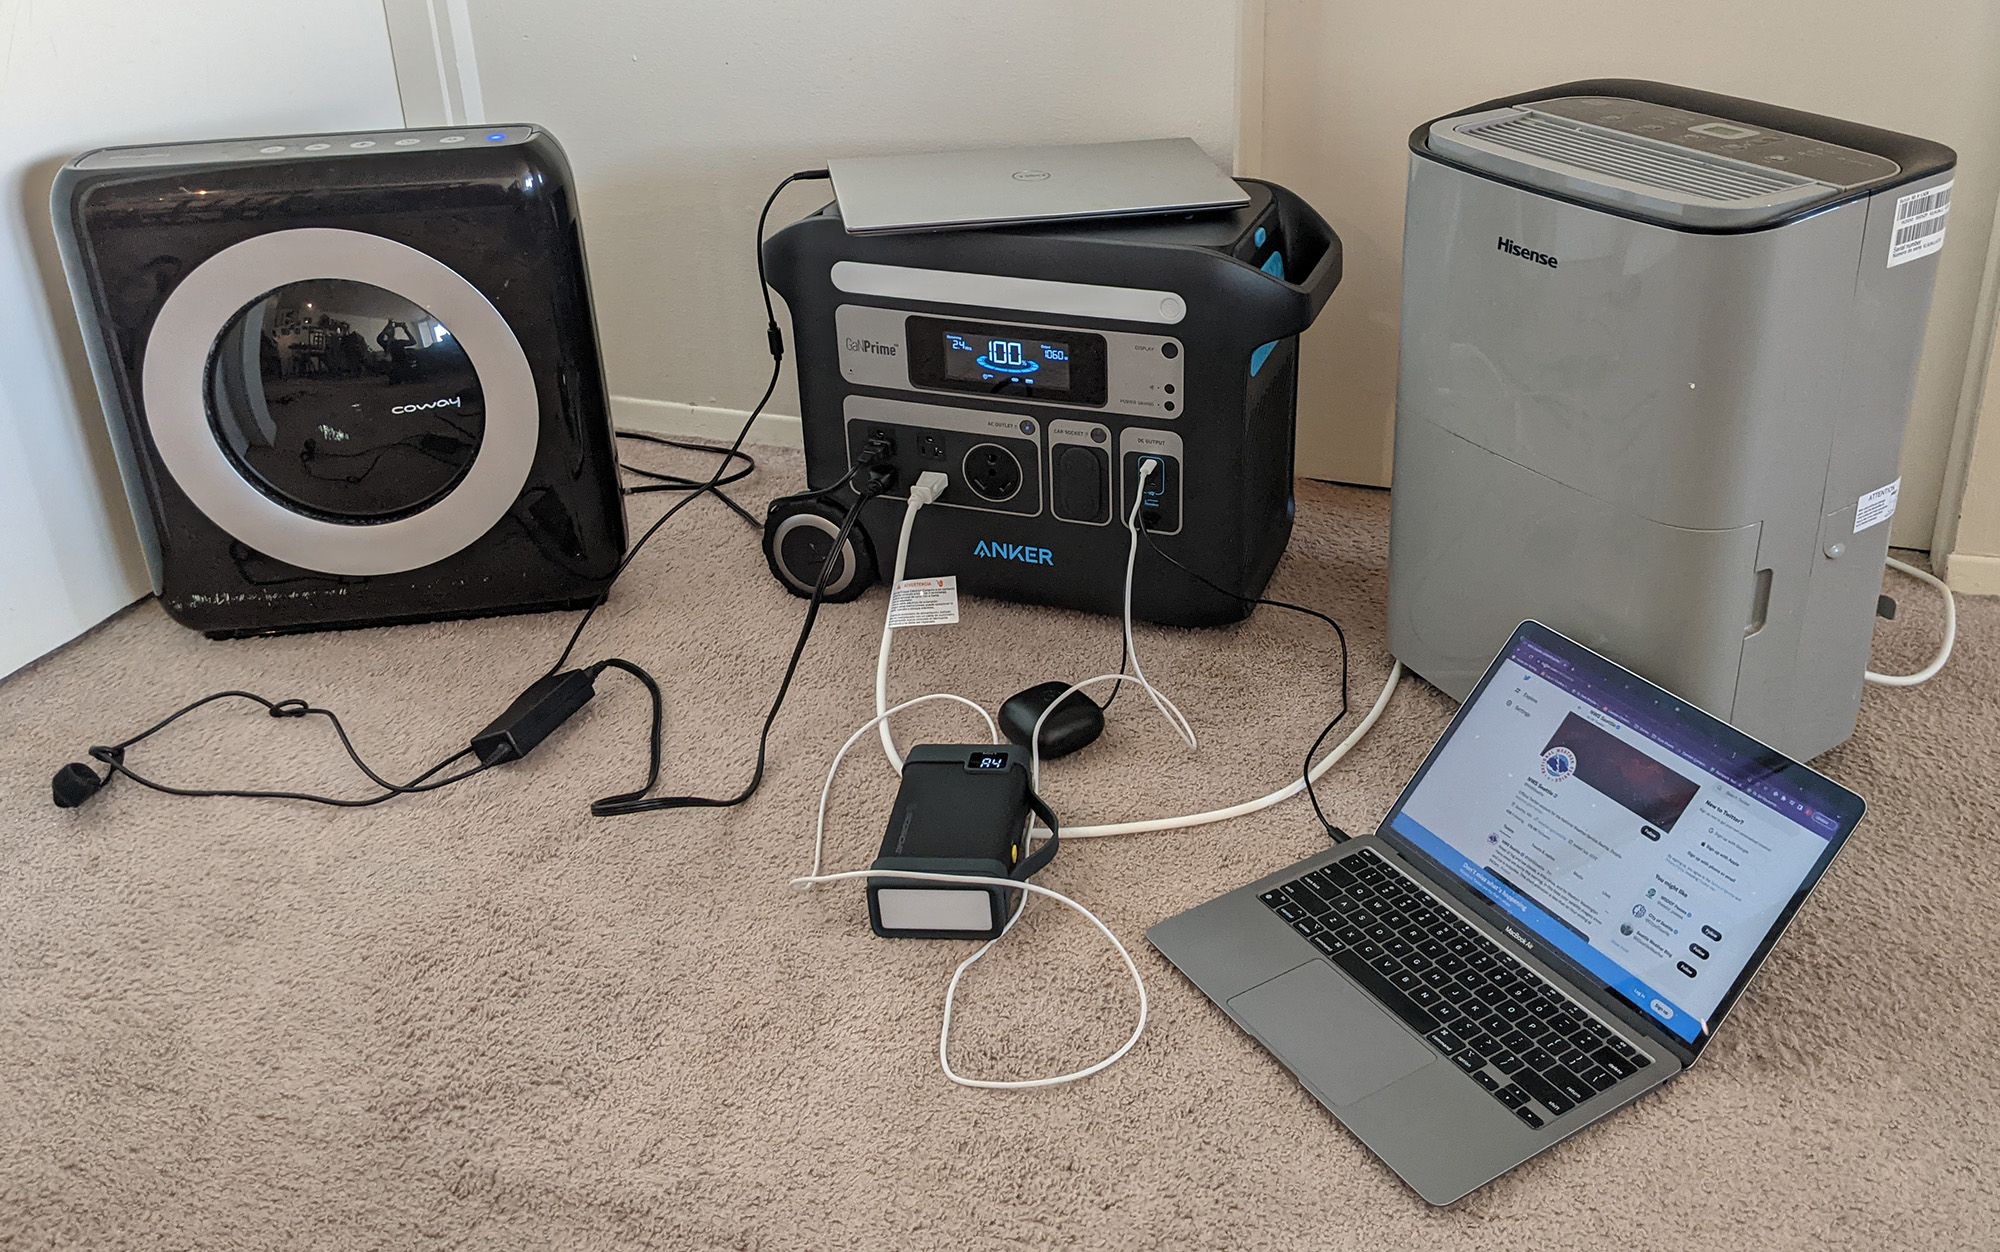 Two laptops as well as a power bank, air purifier, and dehumidifier were no match for the Anker PowerHouse 767.